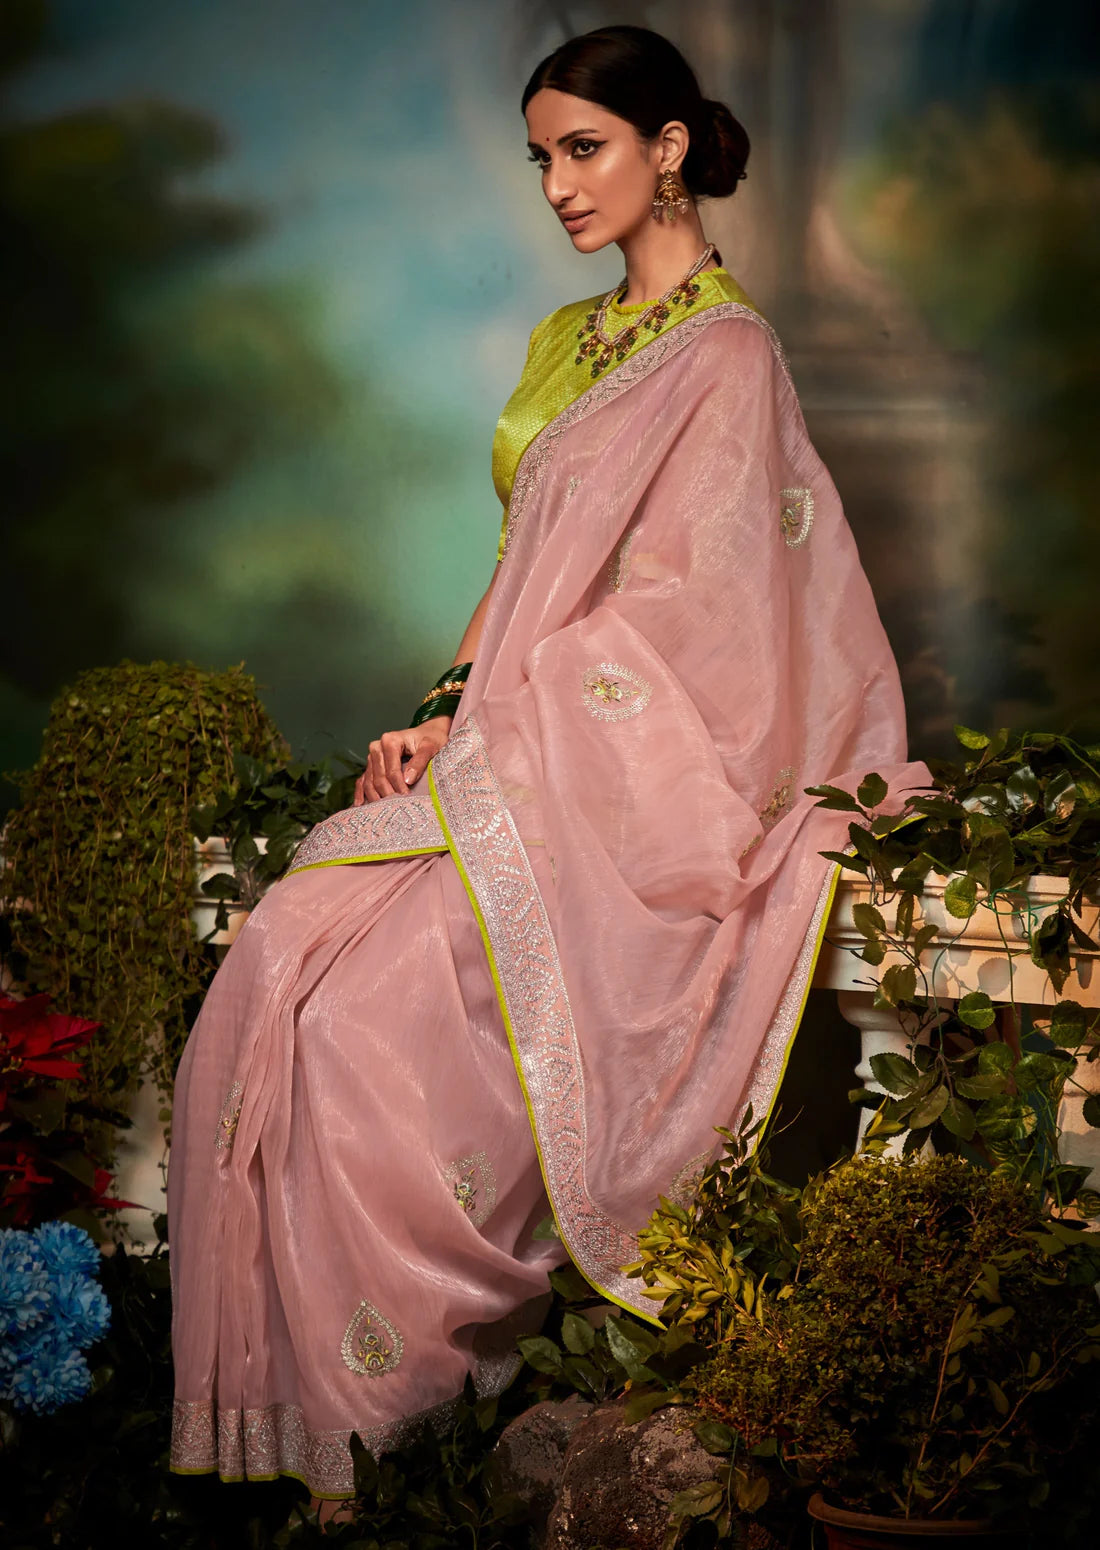 Woman in pink pure organza hand embroidery saree with yellow blouse.